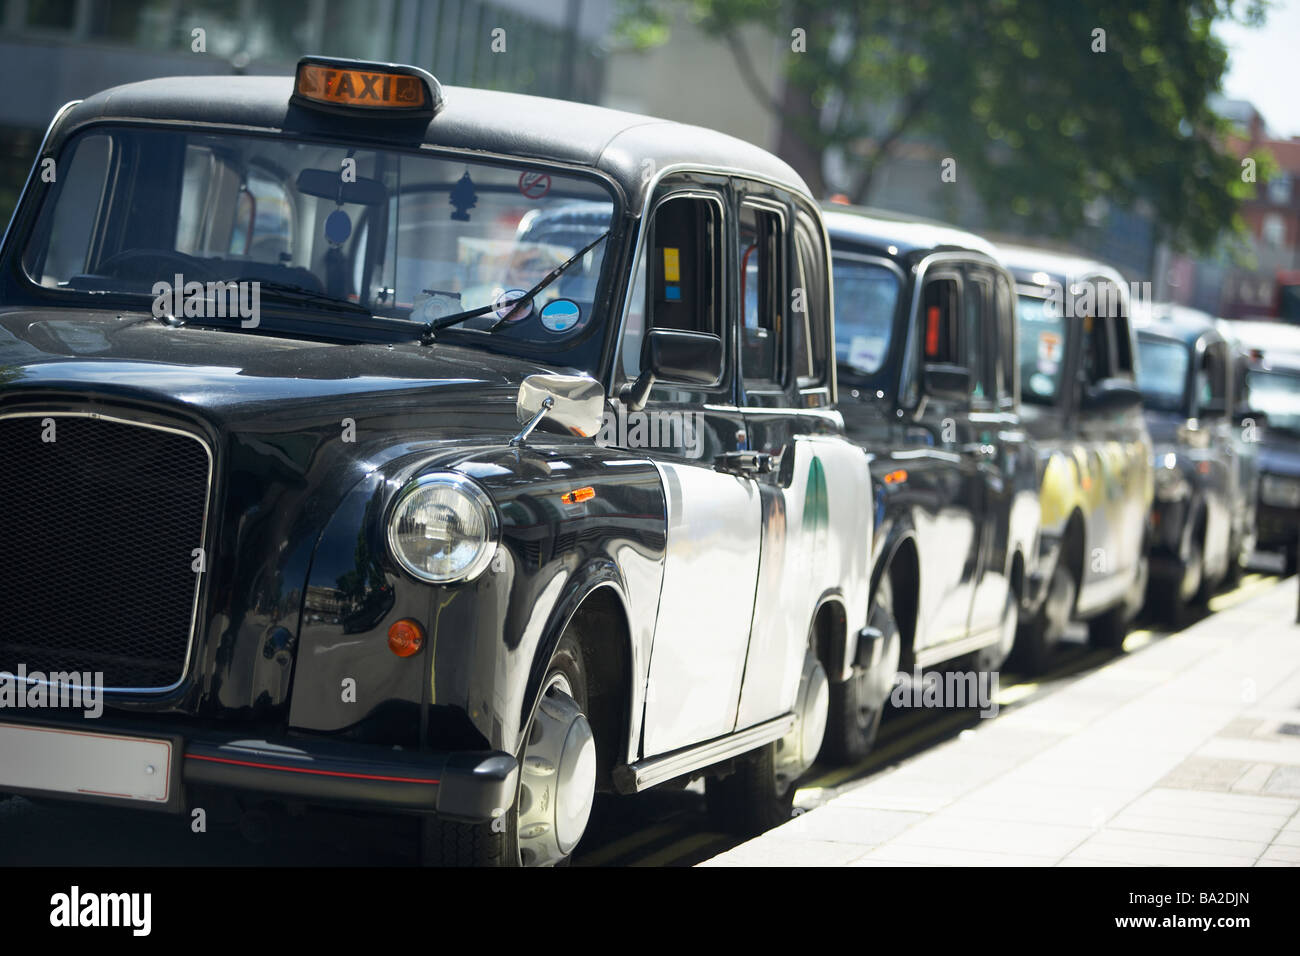 London Taxis Lined Up On Sidewalk Stock Photo